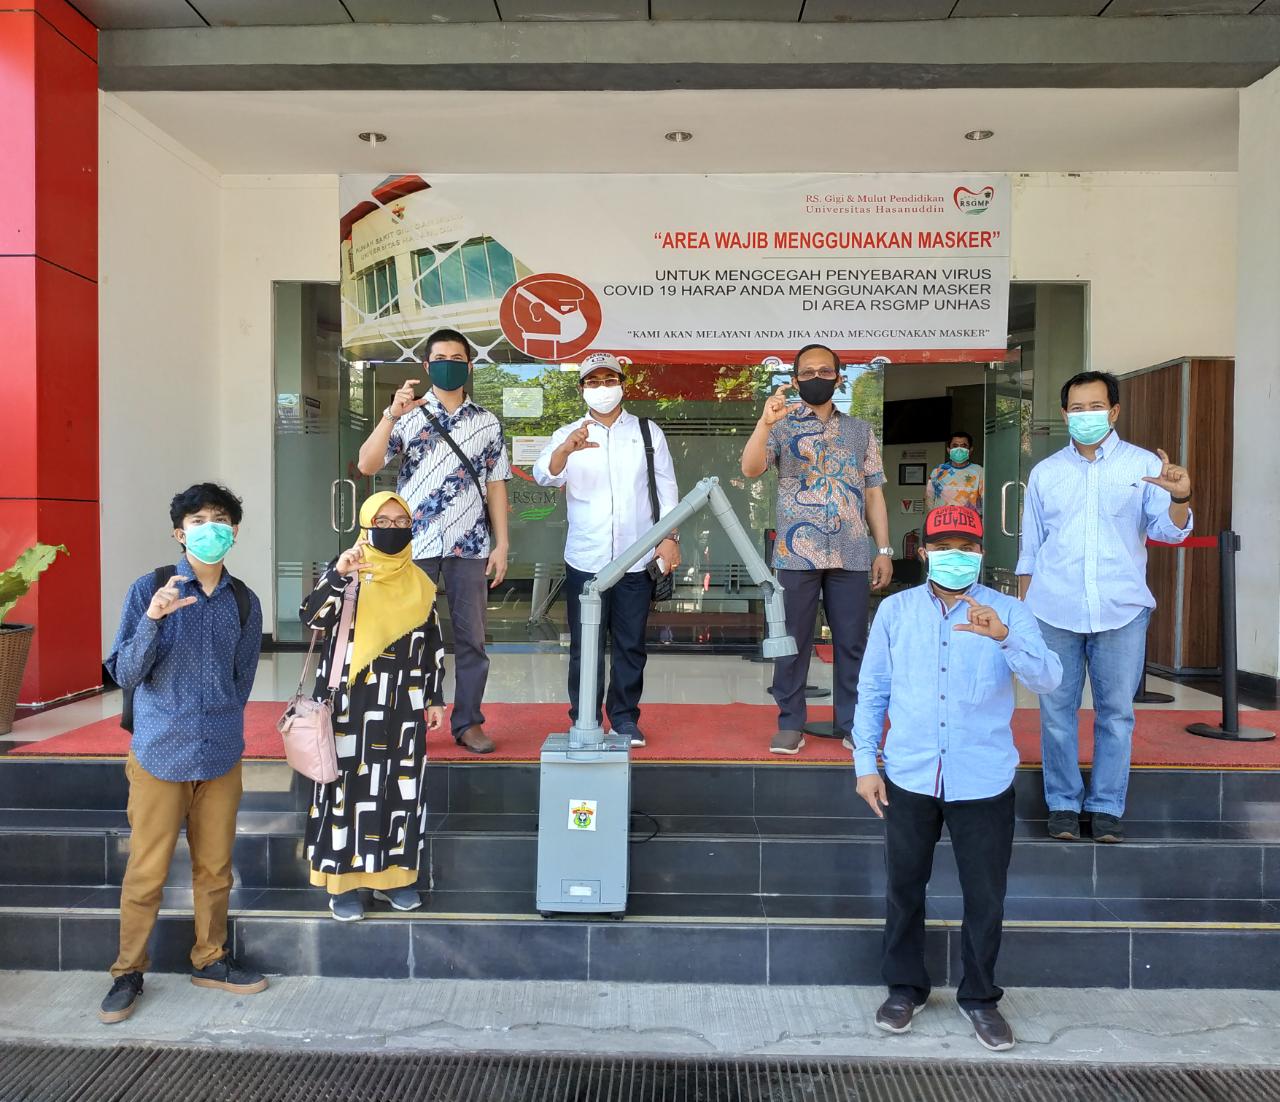 A team at Universitas Hasanuddin (UNHAS) under the leadership of an Australia Awards alumnus Dr Muhammad Anshar developed a dental care tool reducing aerosol viral load that is now in use at the Dental and Oral Hospital of UNHAS.